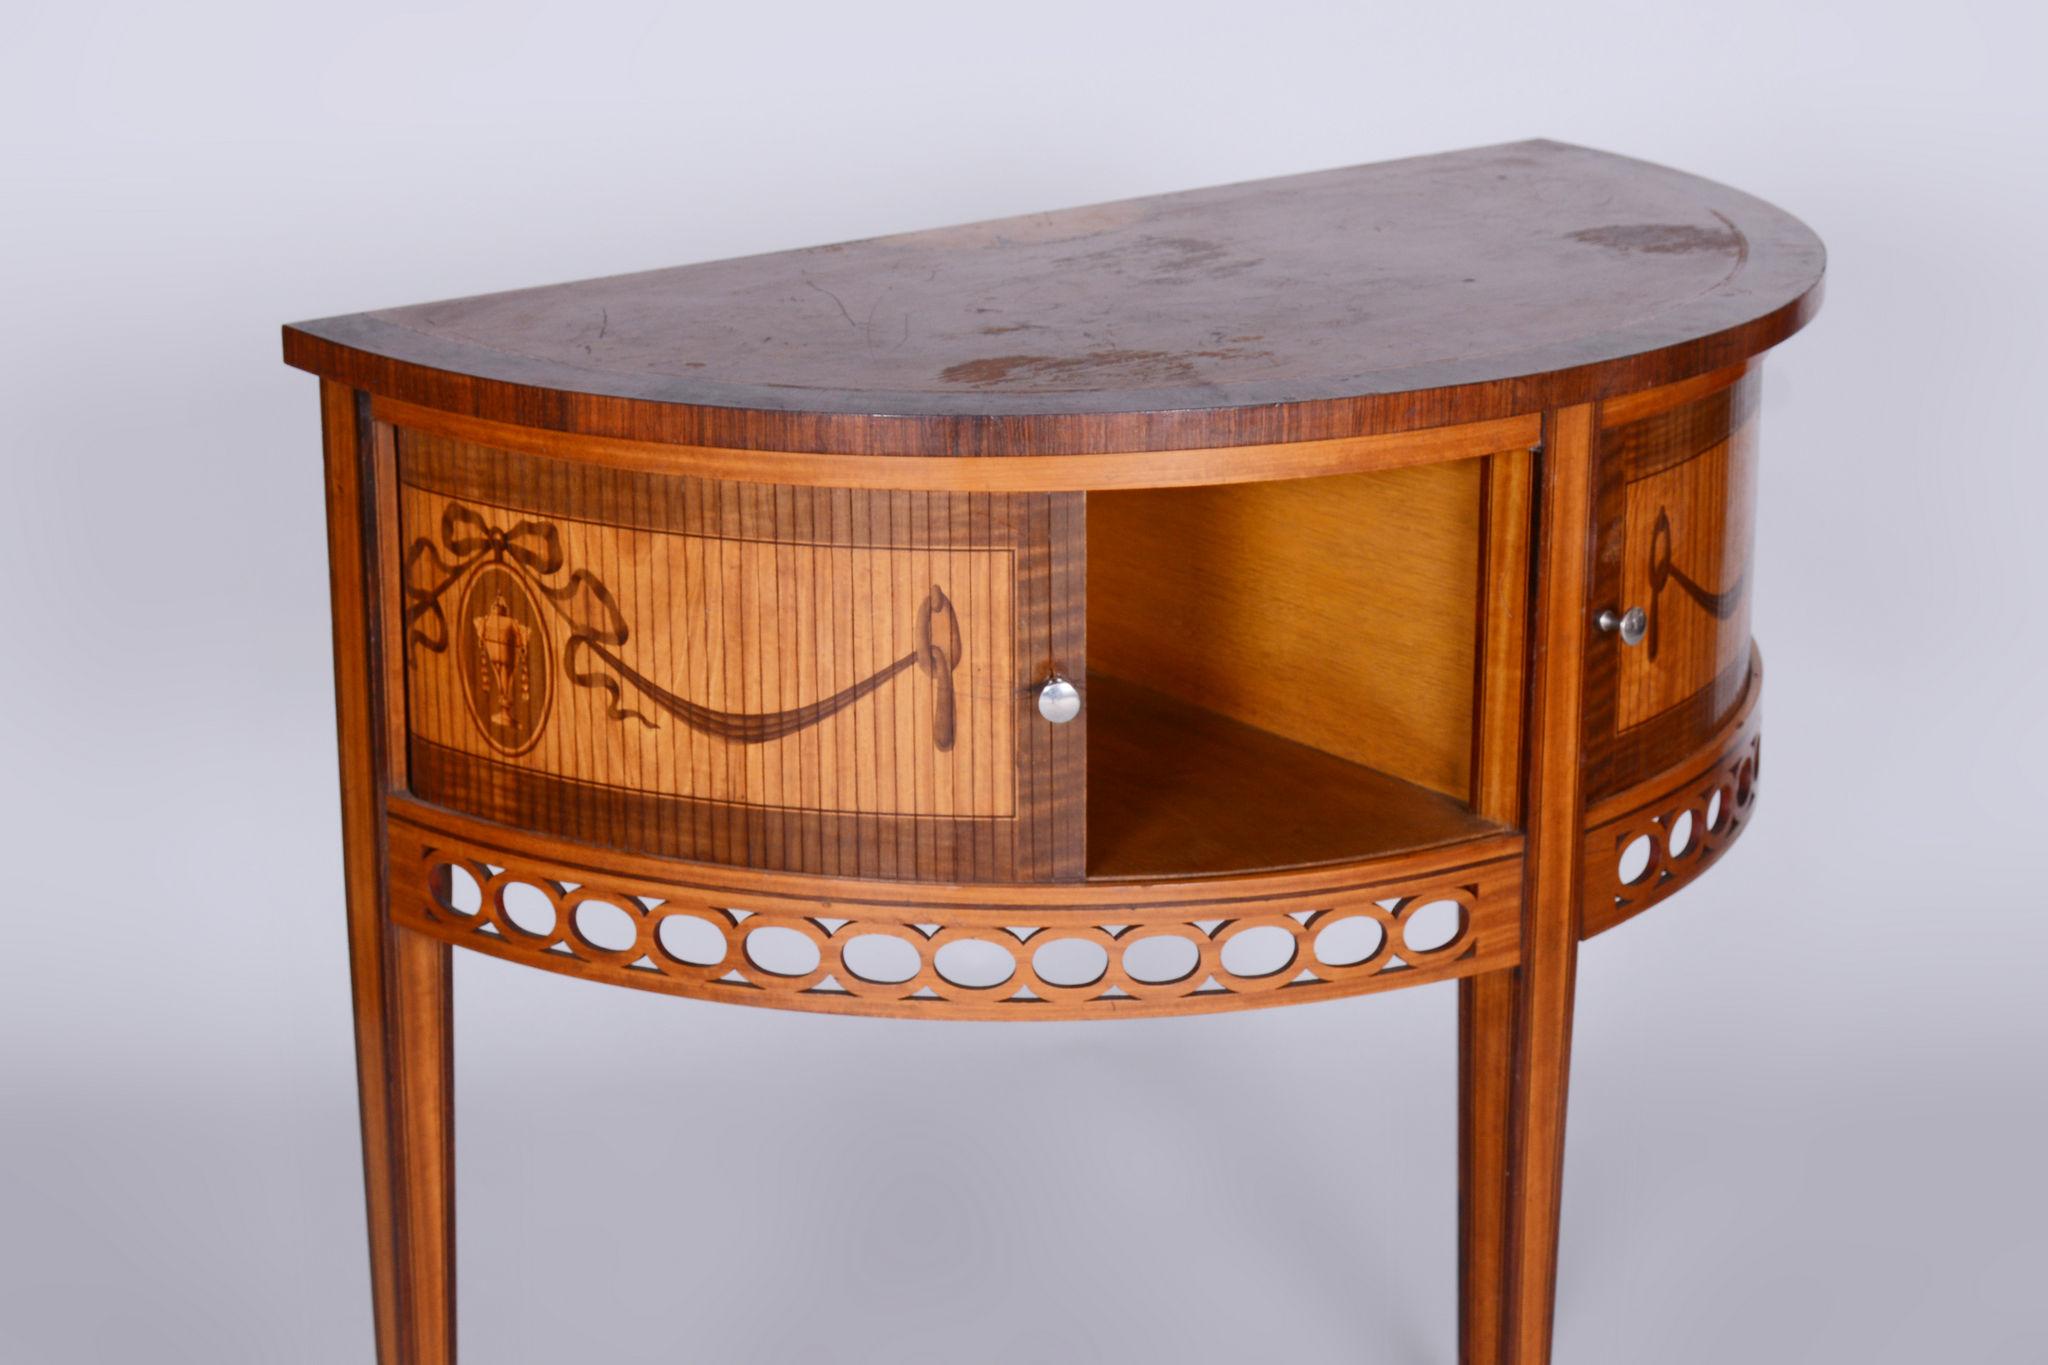 Restored Biedermeier Side Table, Walnut, Maple, Unique Marquetry, France, 1850s In Good Condition For Sale In Horomerice, CZ